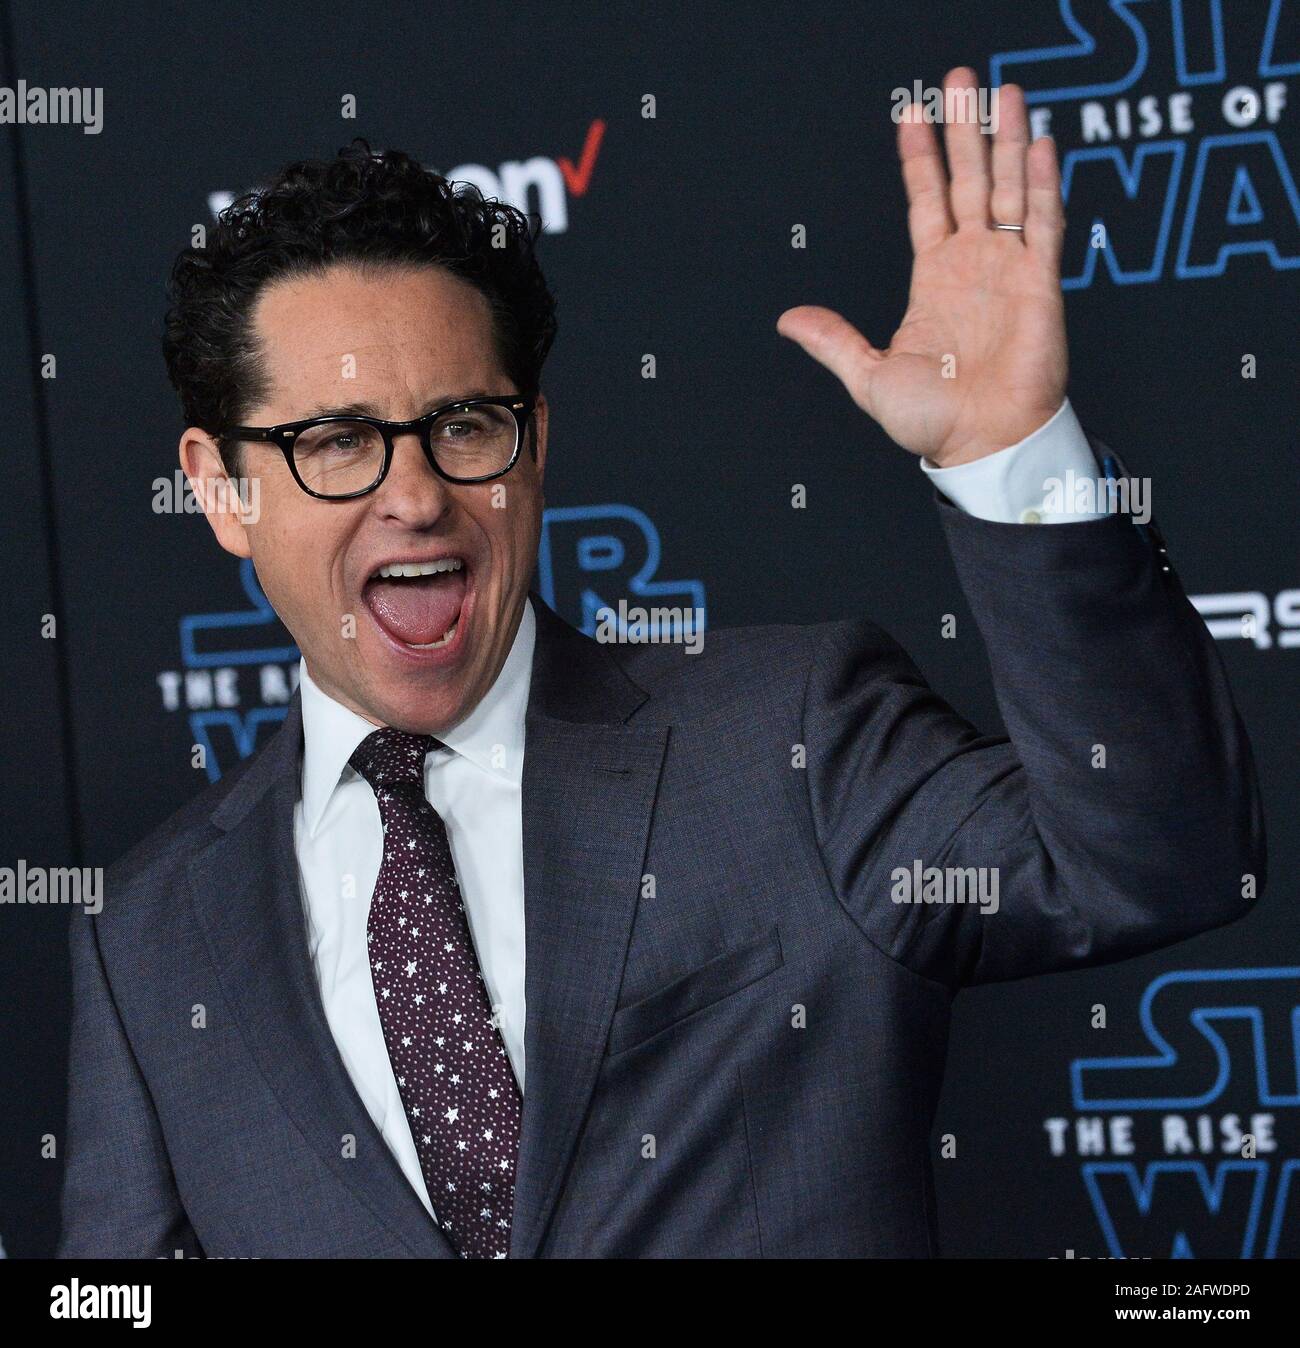 Los Angeles, United States. 17th Dec, 2019. Director J.J. Abrams attends the premiere the motion picture sci-fi fantasy 'Star Wars: The Rise of Skywalker' at the TCL Chinese Theatre in the Hollywood section of Los Angeles on Monday, December 16, 2019. Storyline: The surviving Resistance faces the First Order once more in the final chapter of the Skywalker saga. Photo by Jim Ruymen/UPI Credit: UPI/Alamy Live News Stock Photo